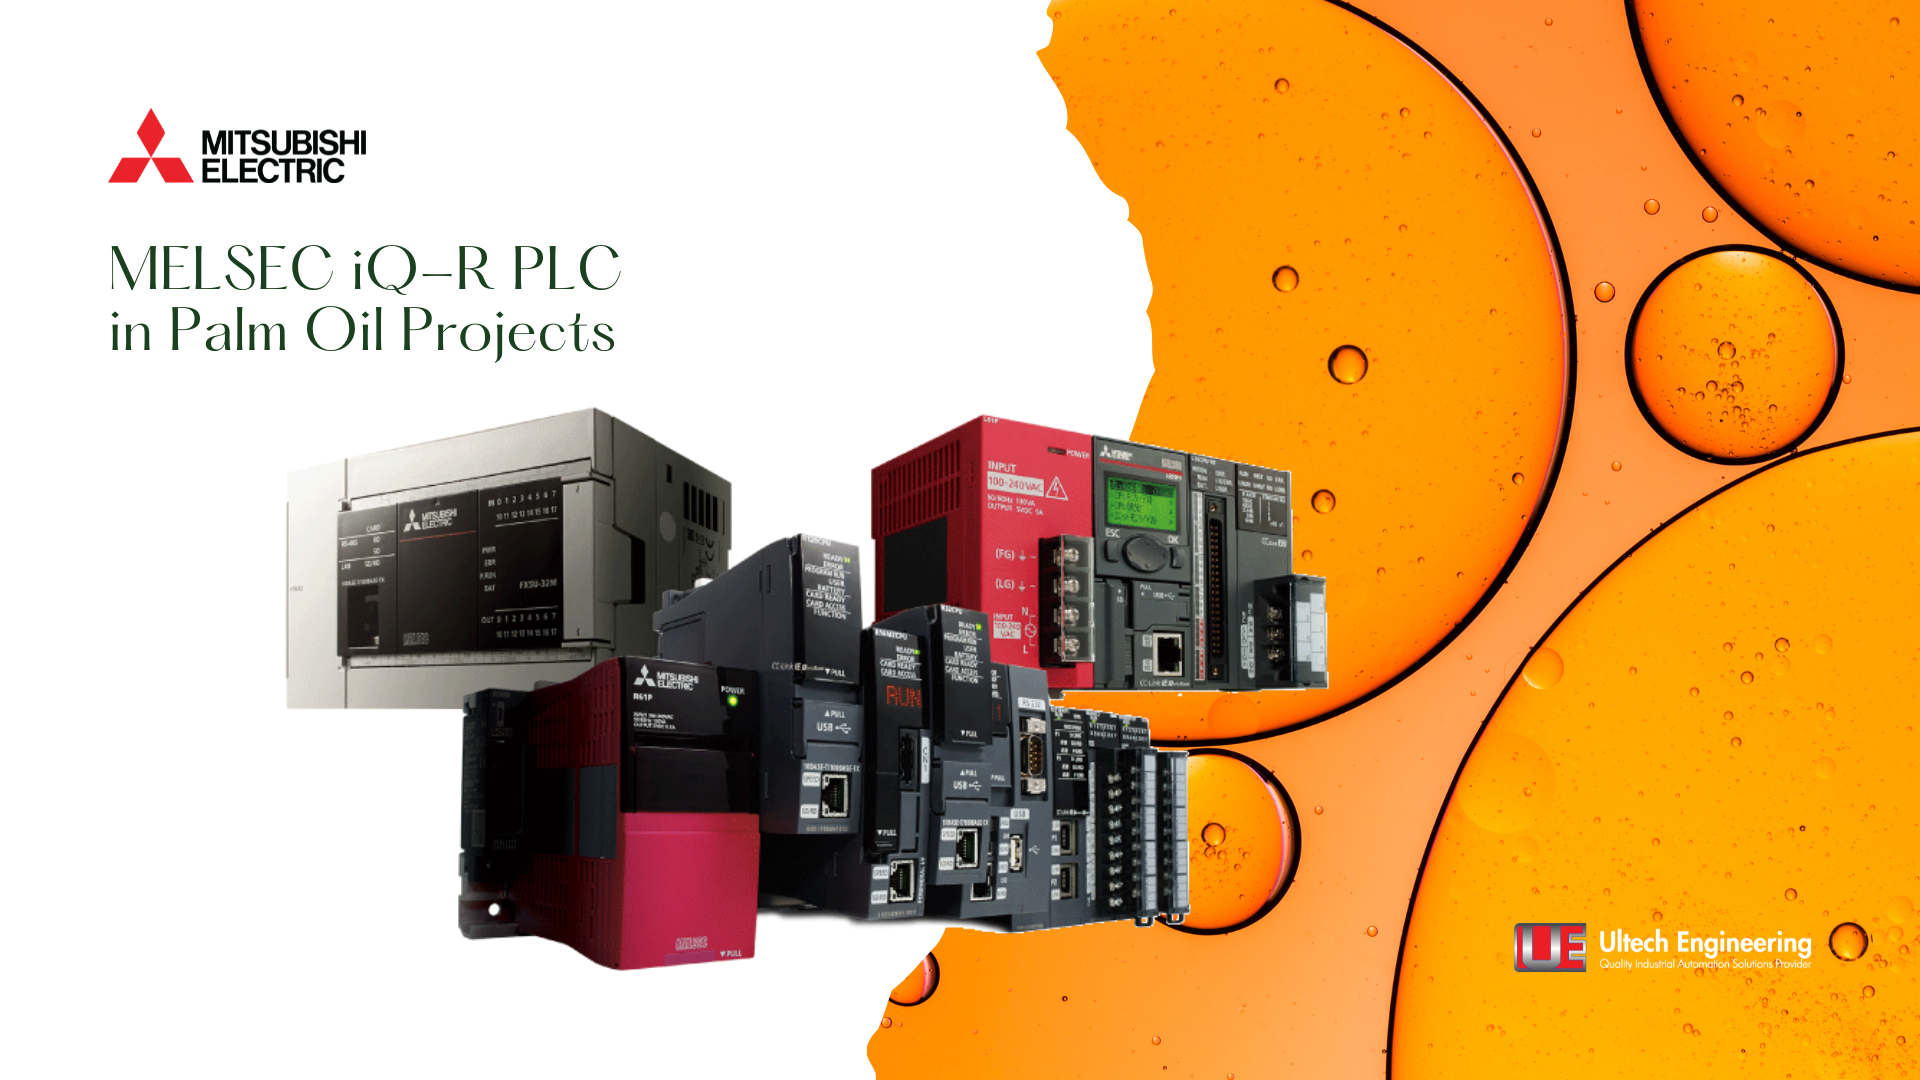 Driving Precision and Efficiency: Ultech Engineering Harnesses Mitsubishi Electric's MELSEC iQ-R PLC in Palm Oil Projects